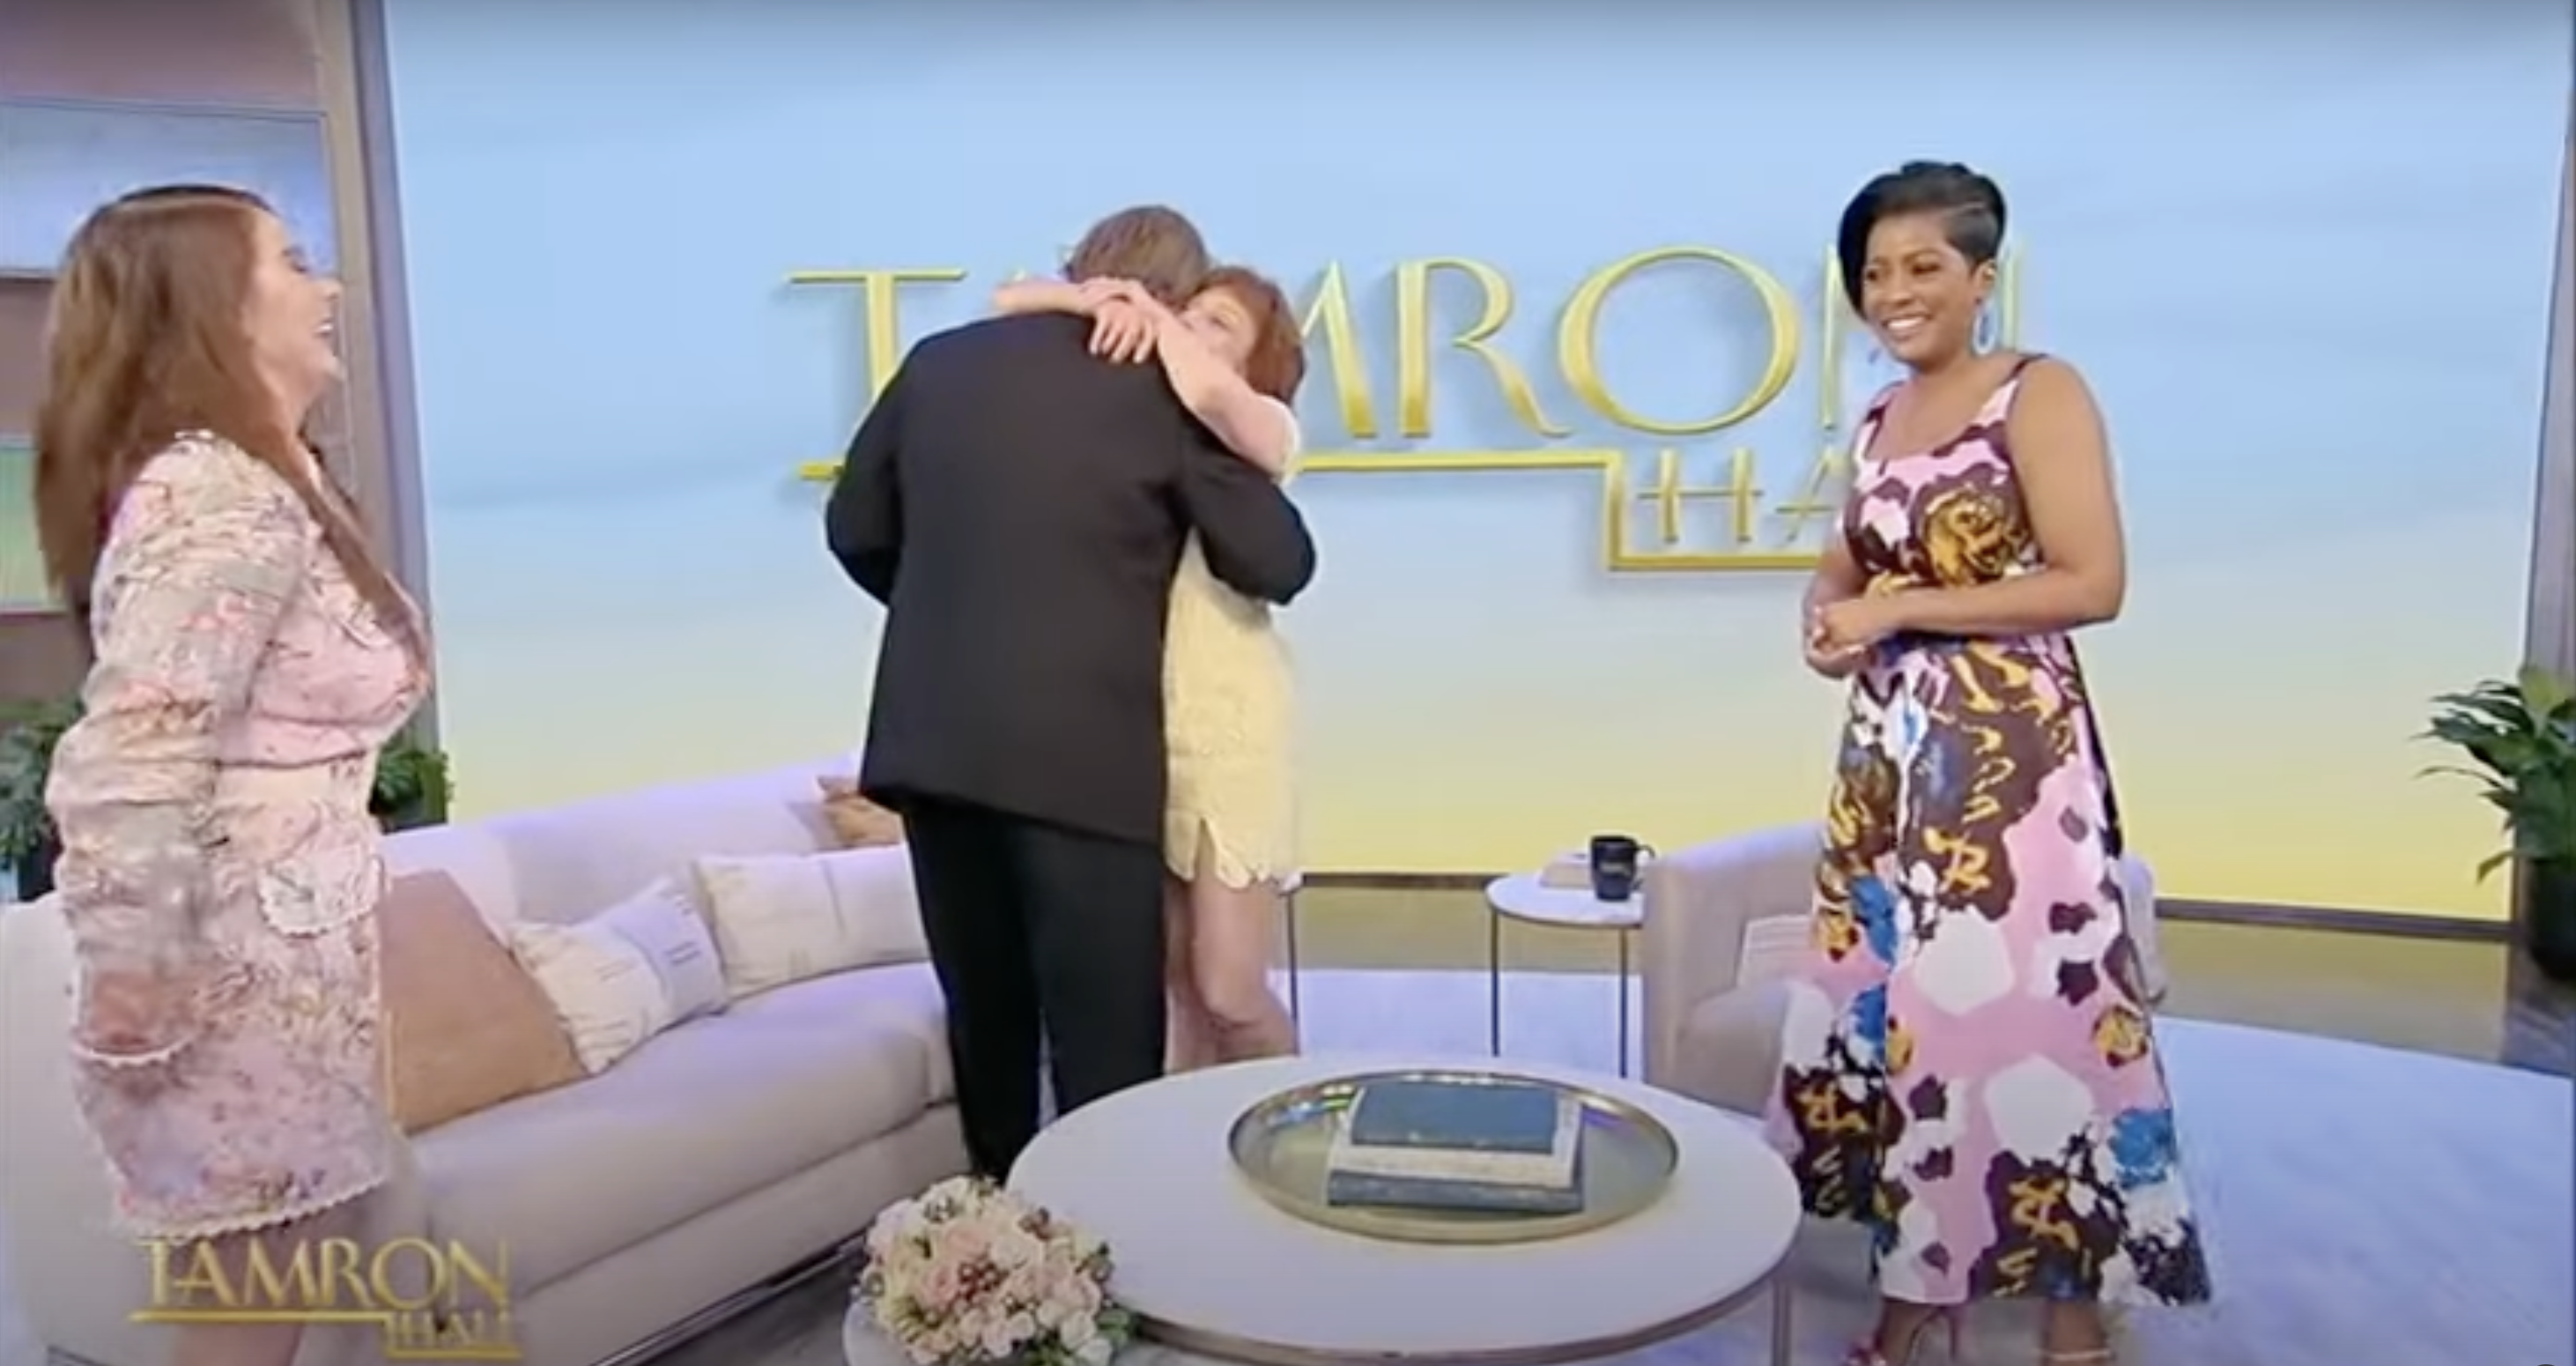 Danielle Jefferson, Dave, Janet Merryman, and Tamron Hall at Tamron Hall Show from a video dated 22 May, 2023 | Source: YouTube